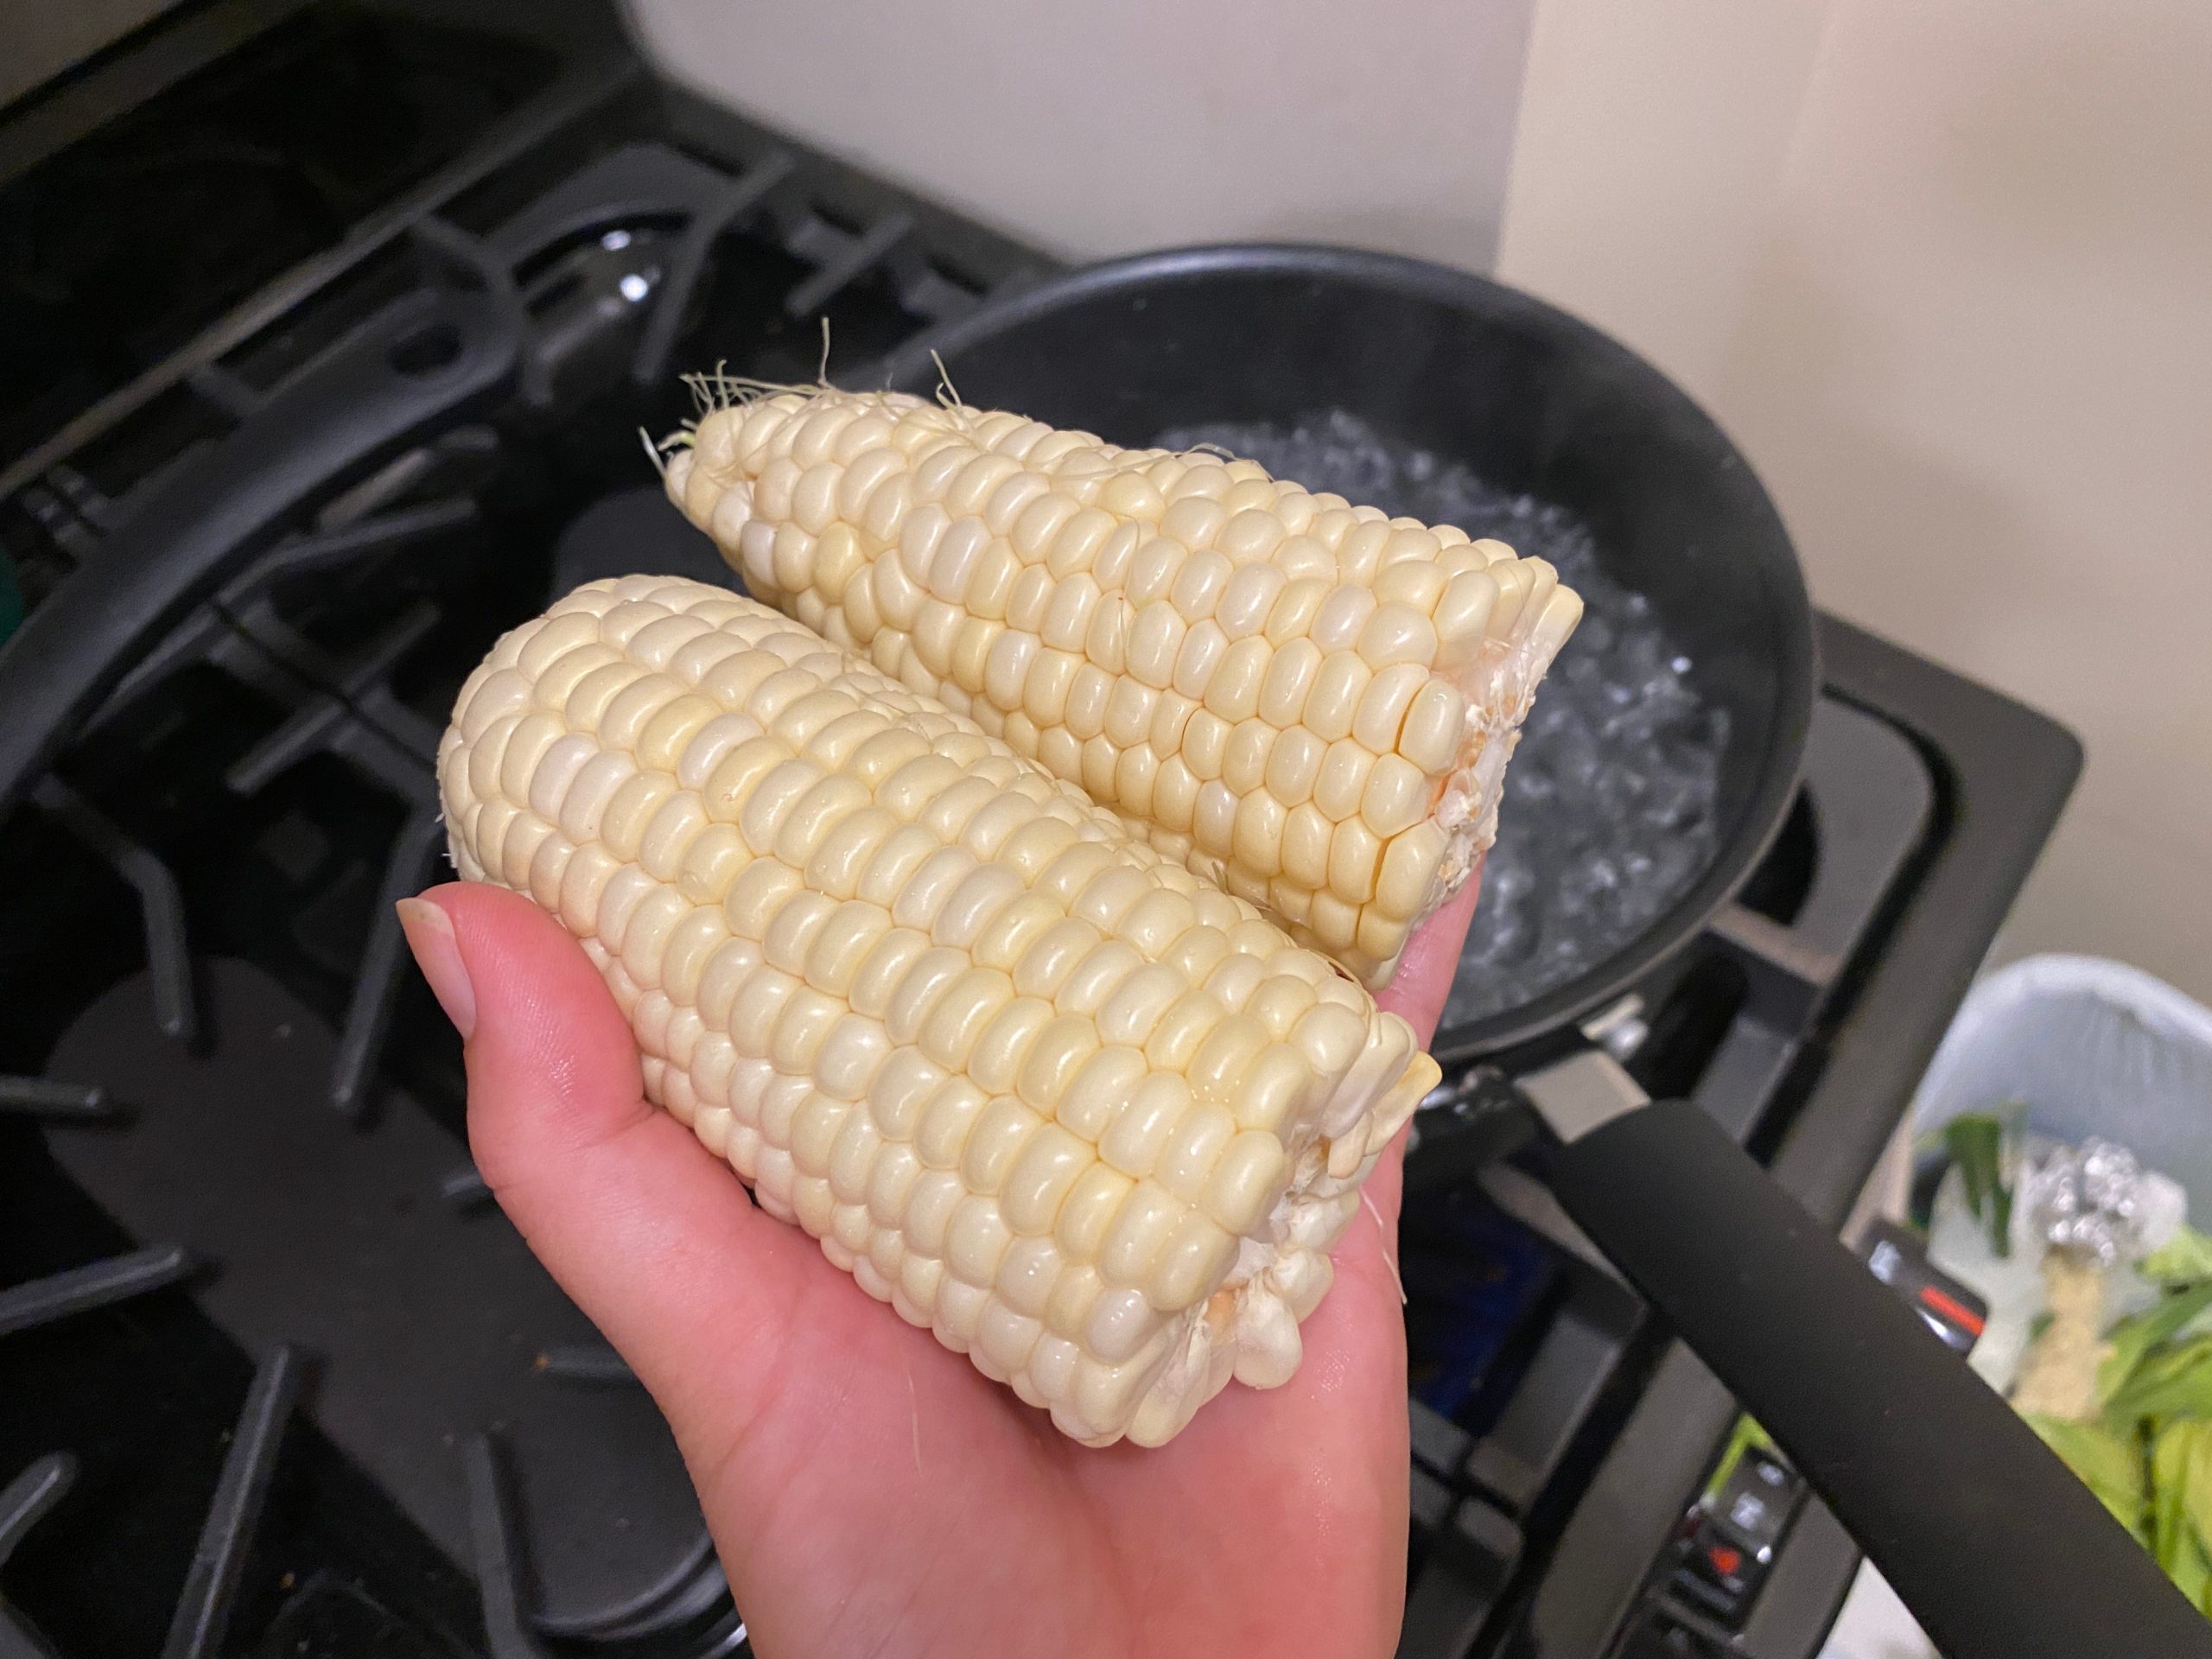 Corn on the cob over a boiling pot.